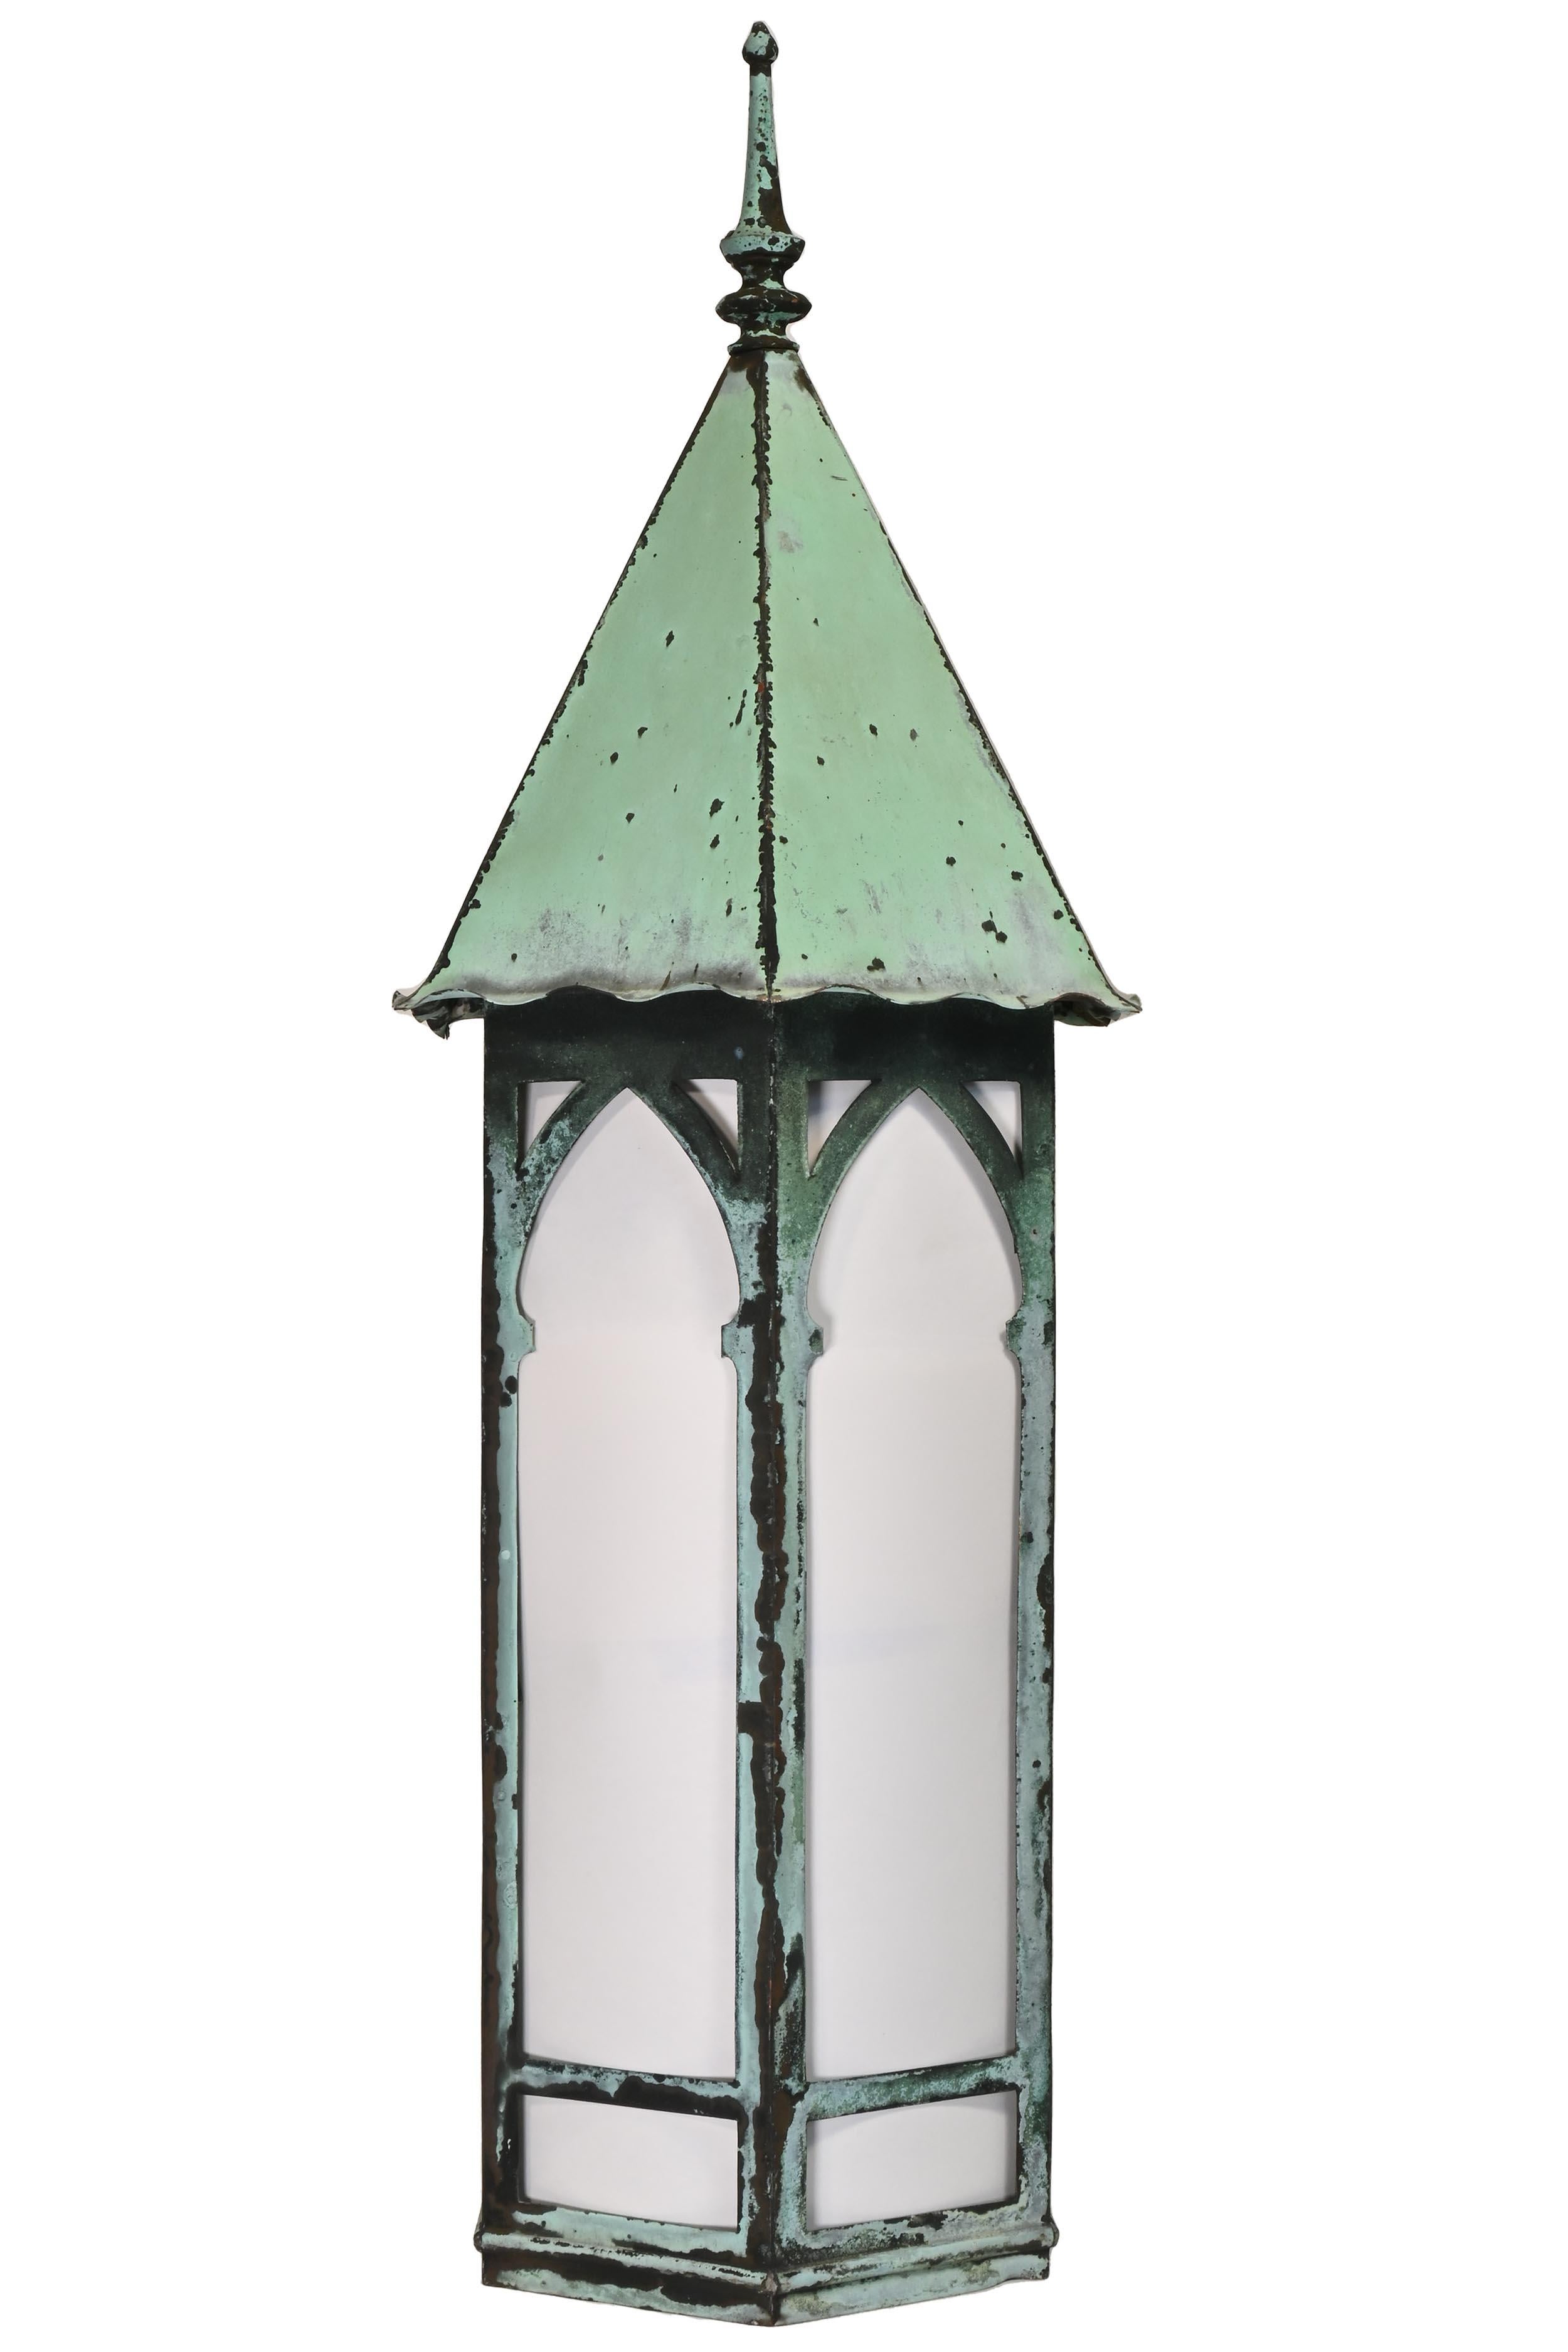 Brass Tall Gothic Steeple Top Entrance Sconces Copper Verdigris Patina For Sale